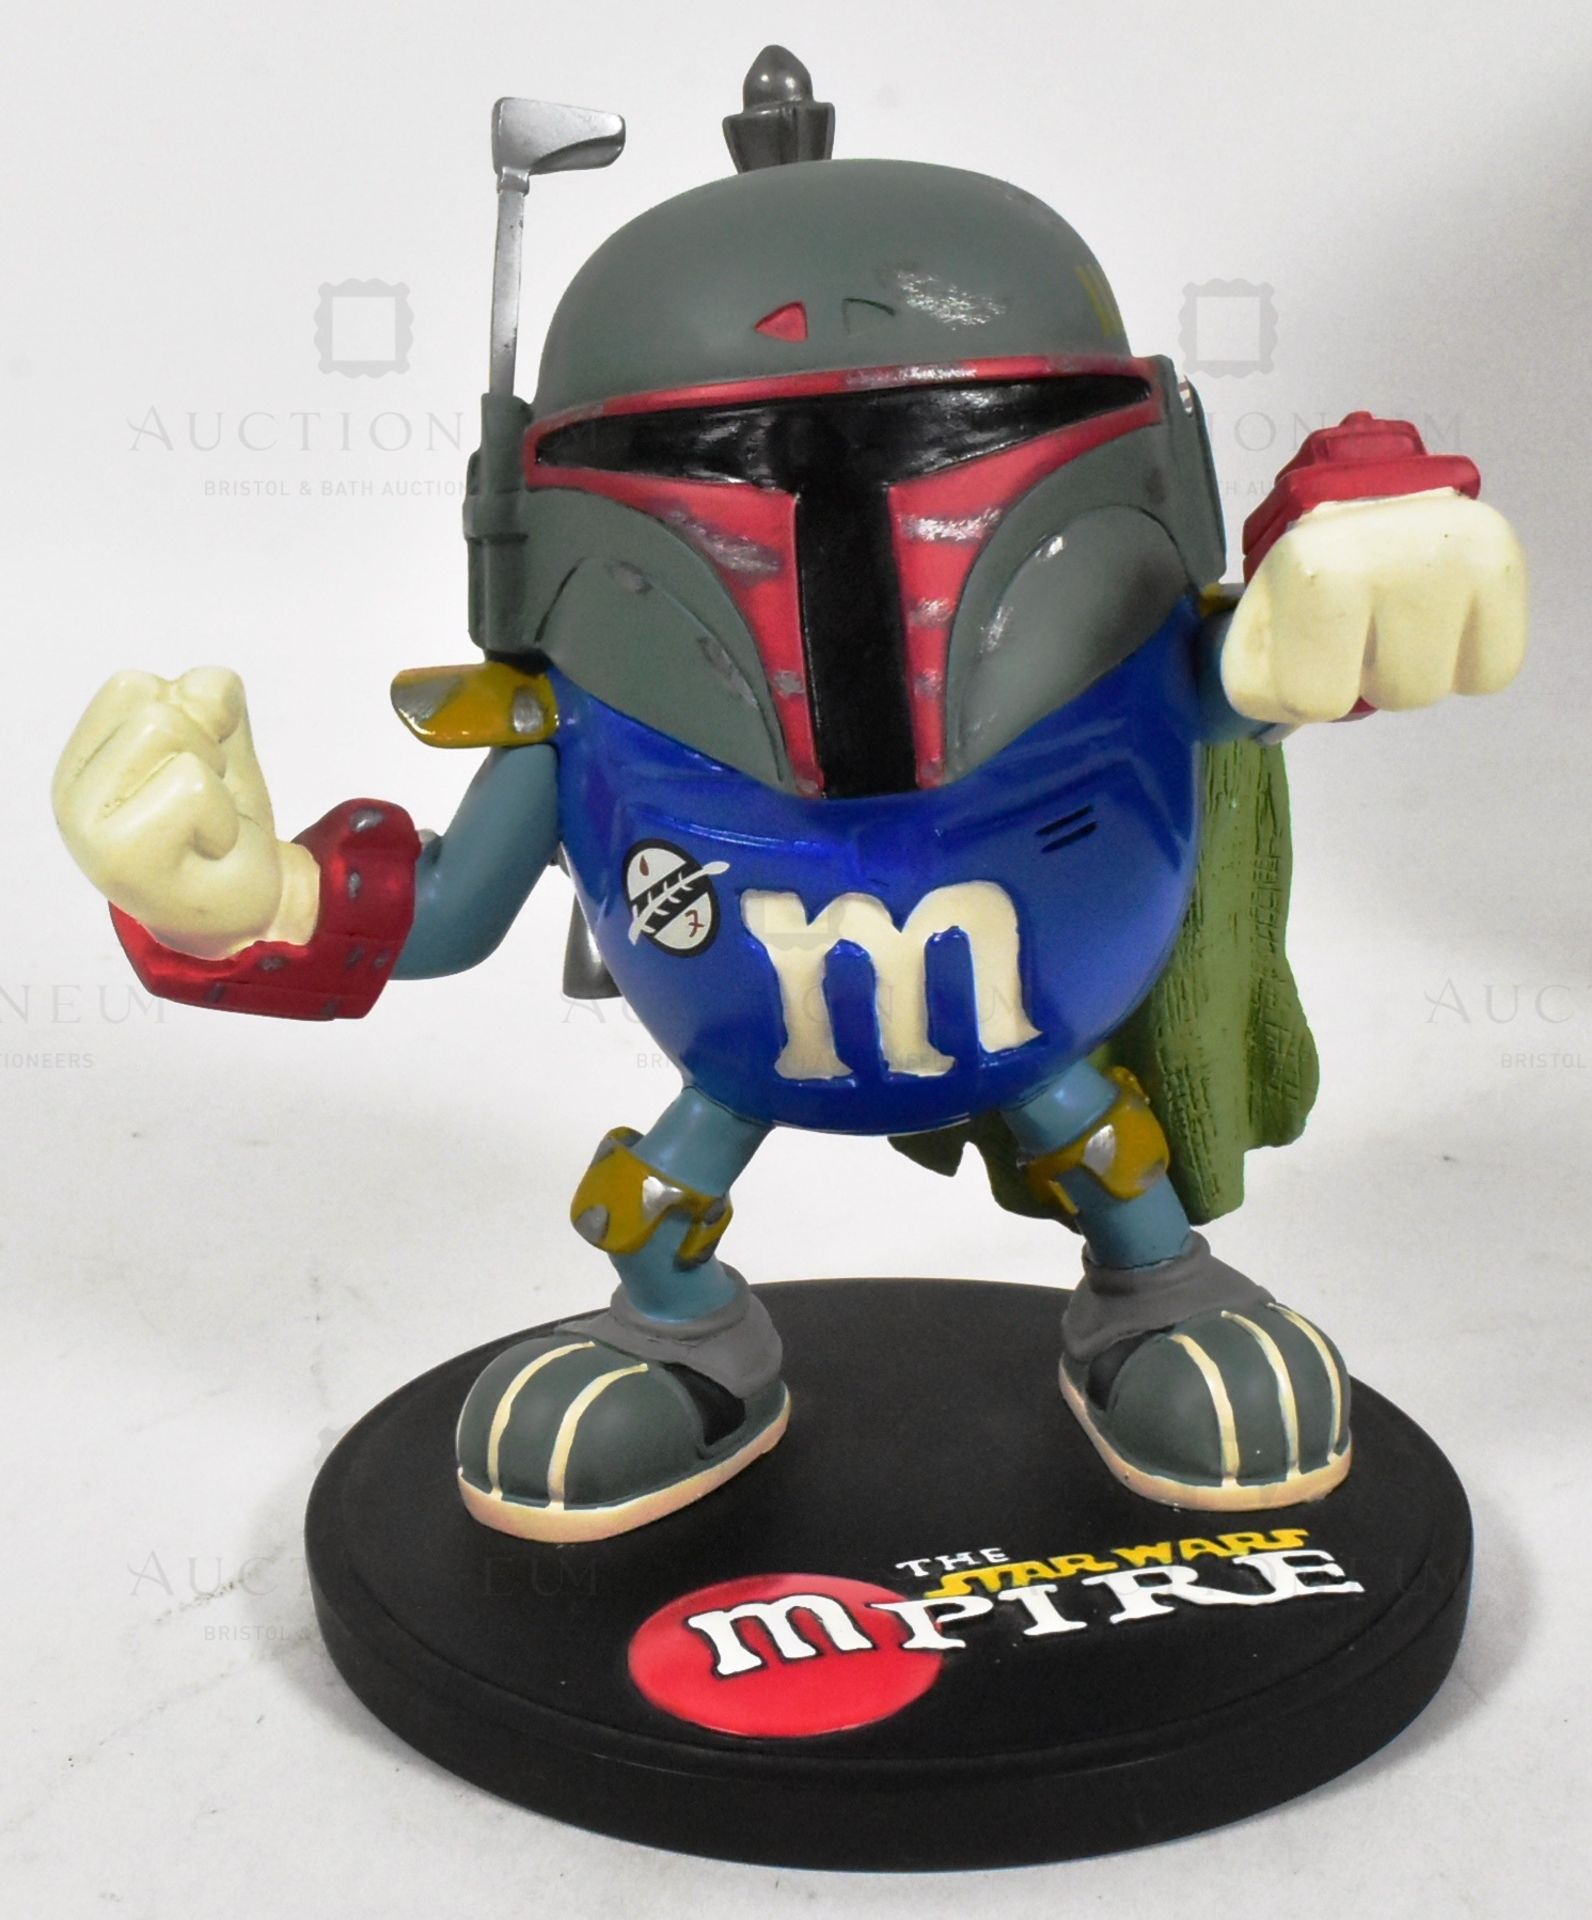 ESTATE OF JEREMY BULLOCH - STAR WARS - MPIRE COLLECTIBLE FIGURINE - Image 2 of 6